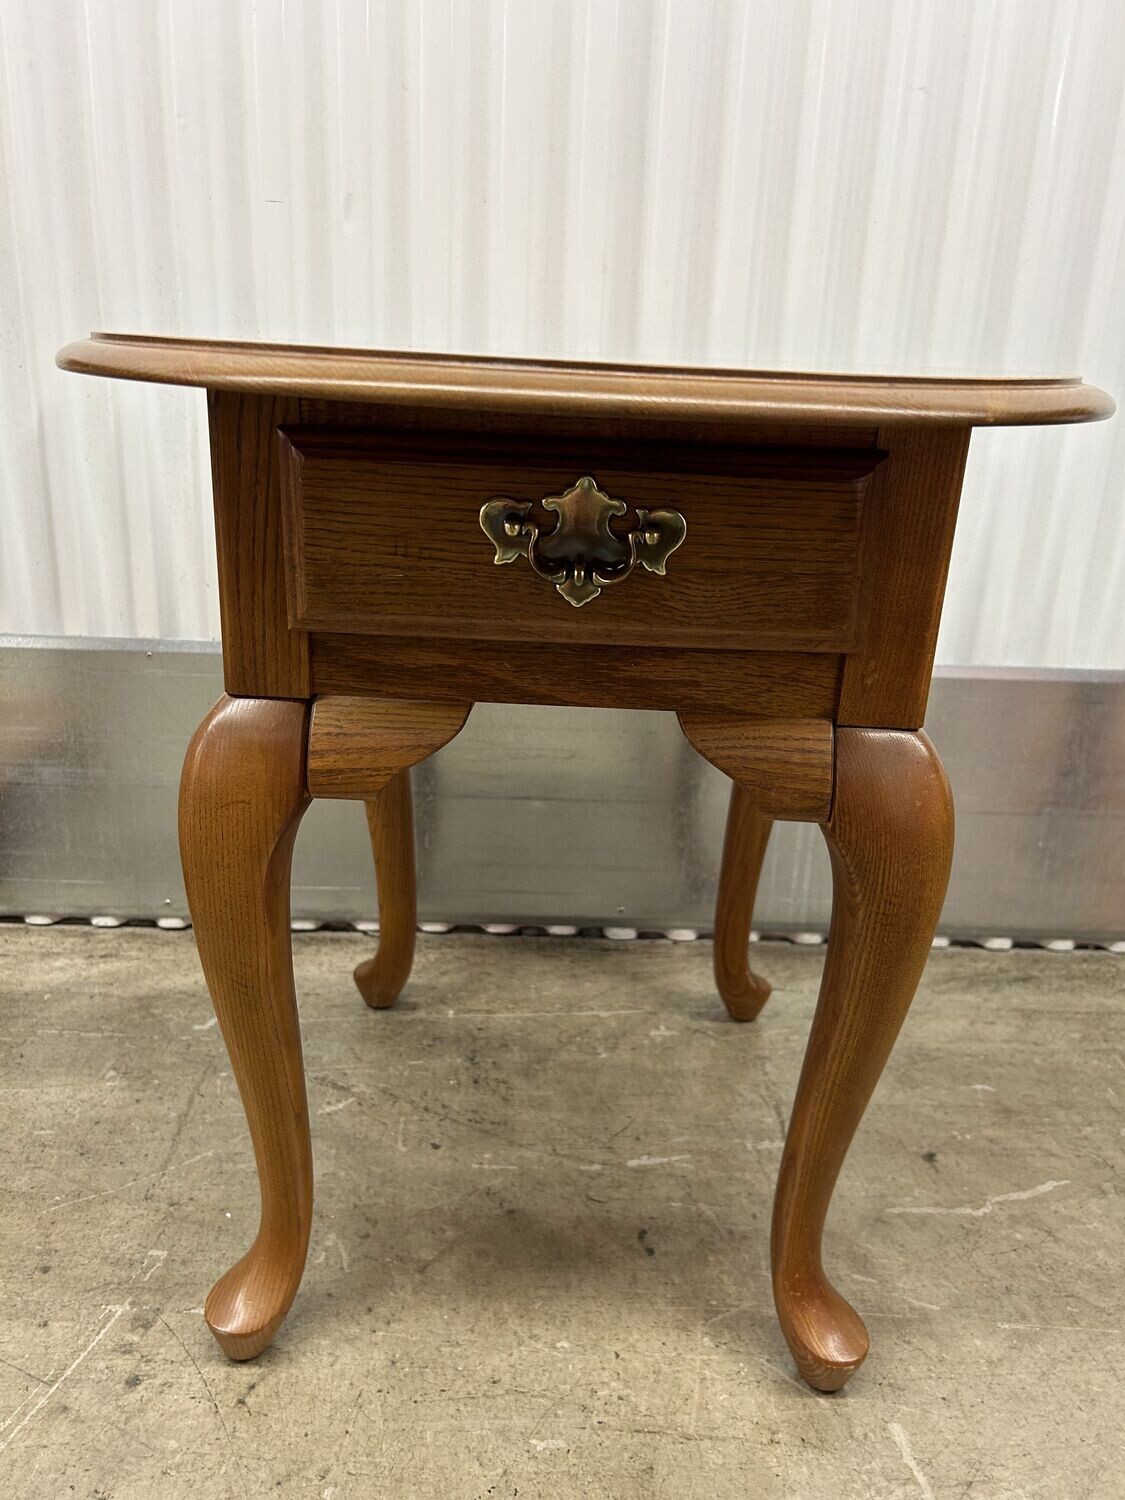 Oval Oak End Table, Kincaid #2114 ** 3 days to sell, full price